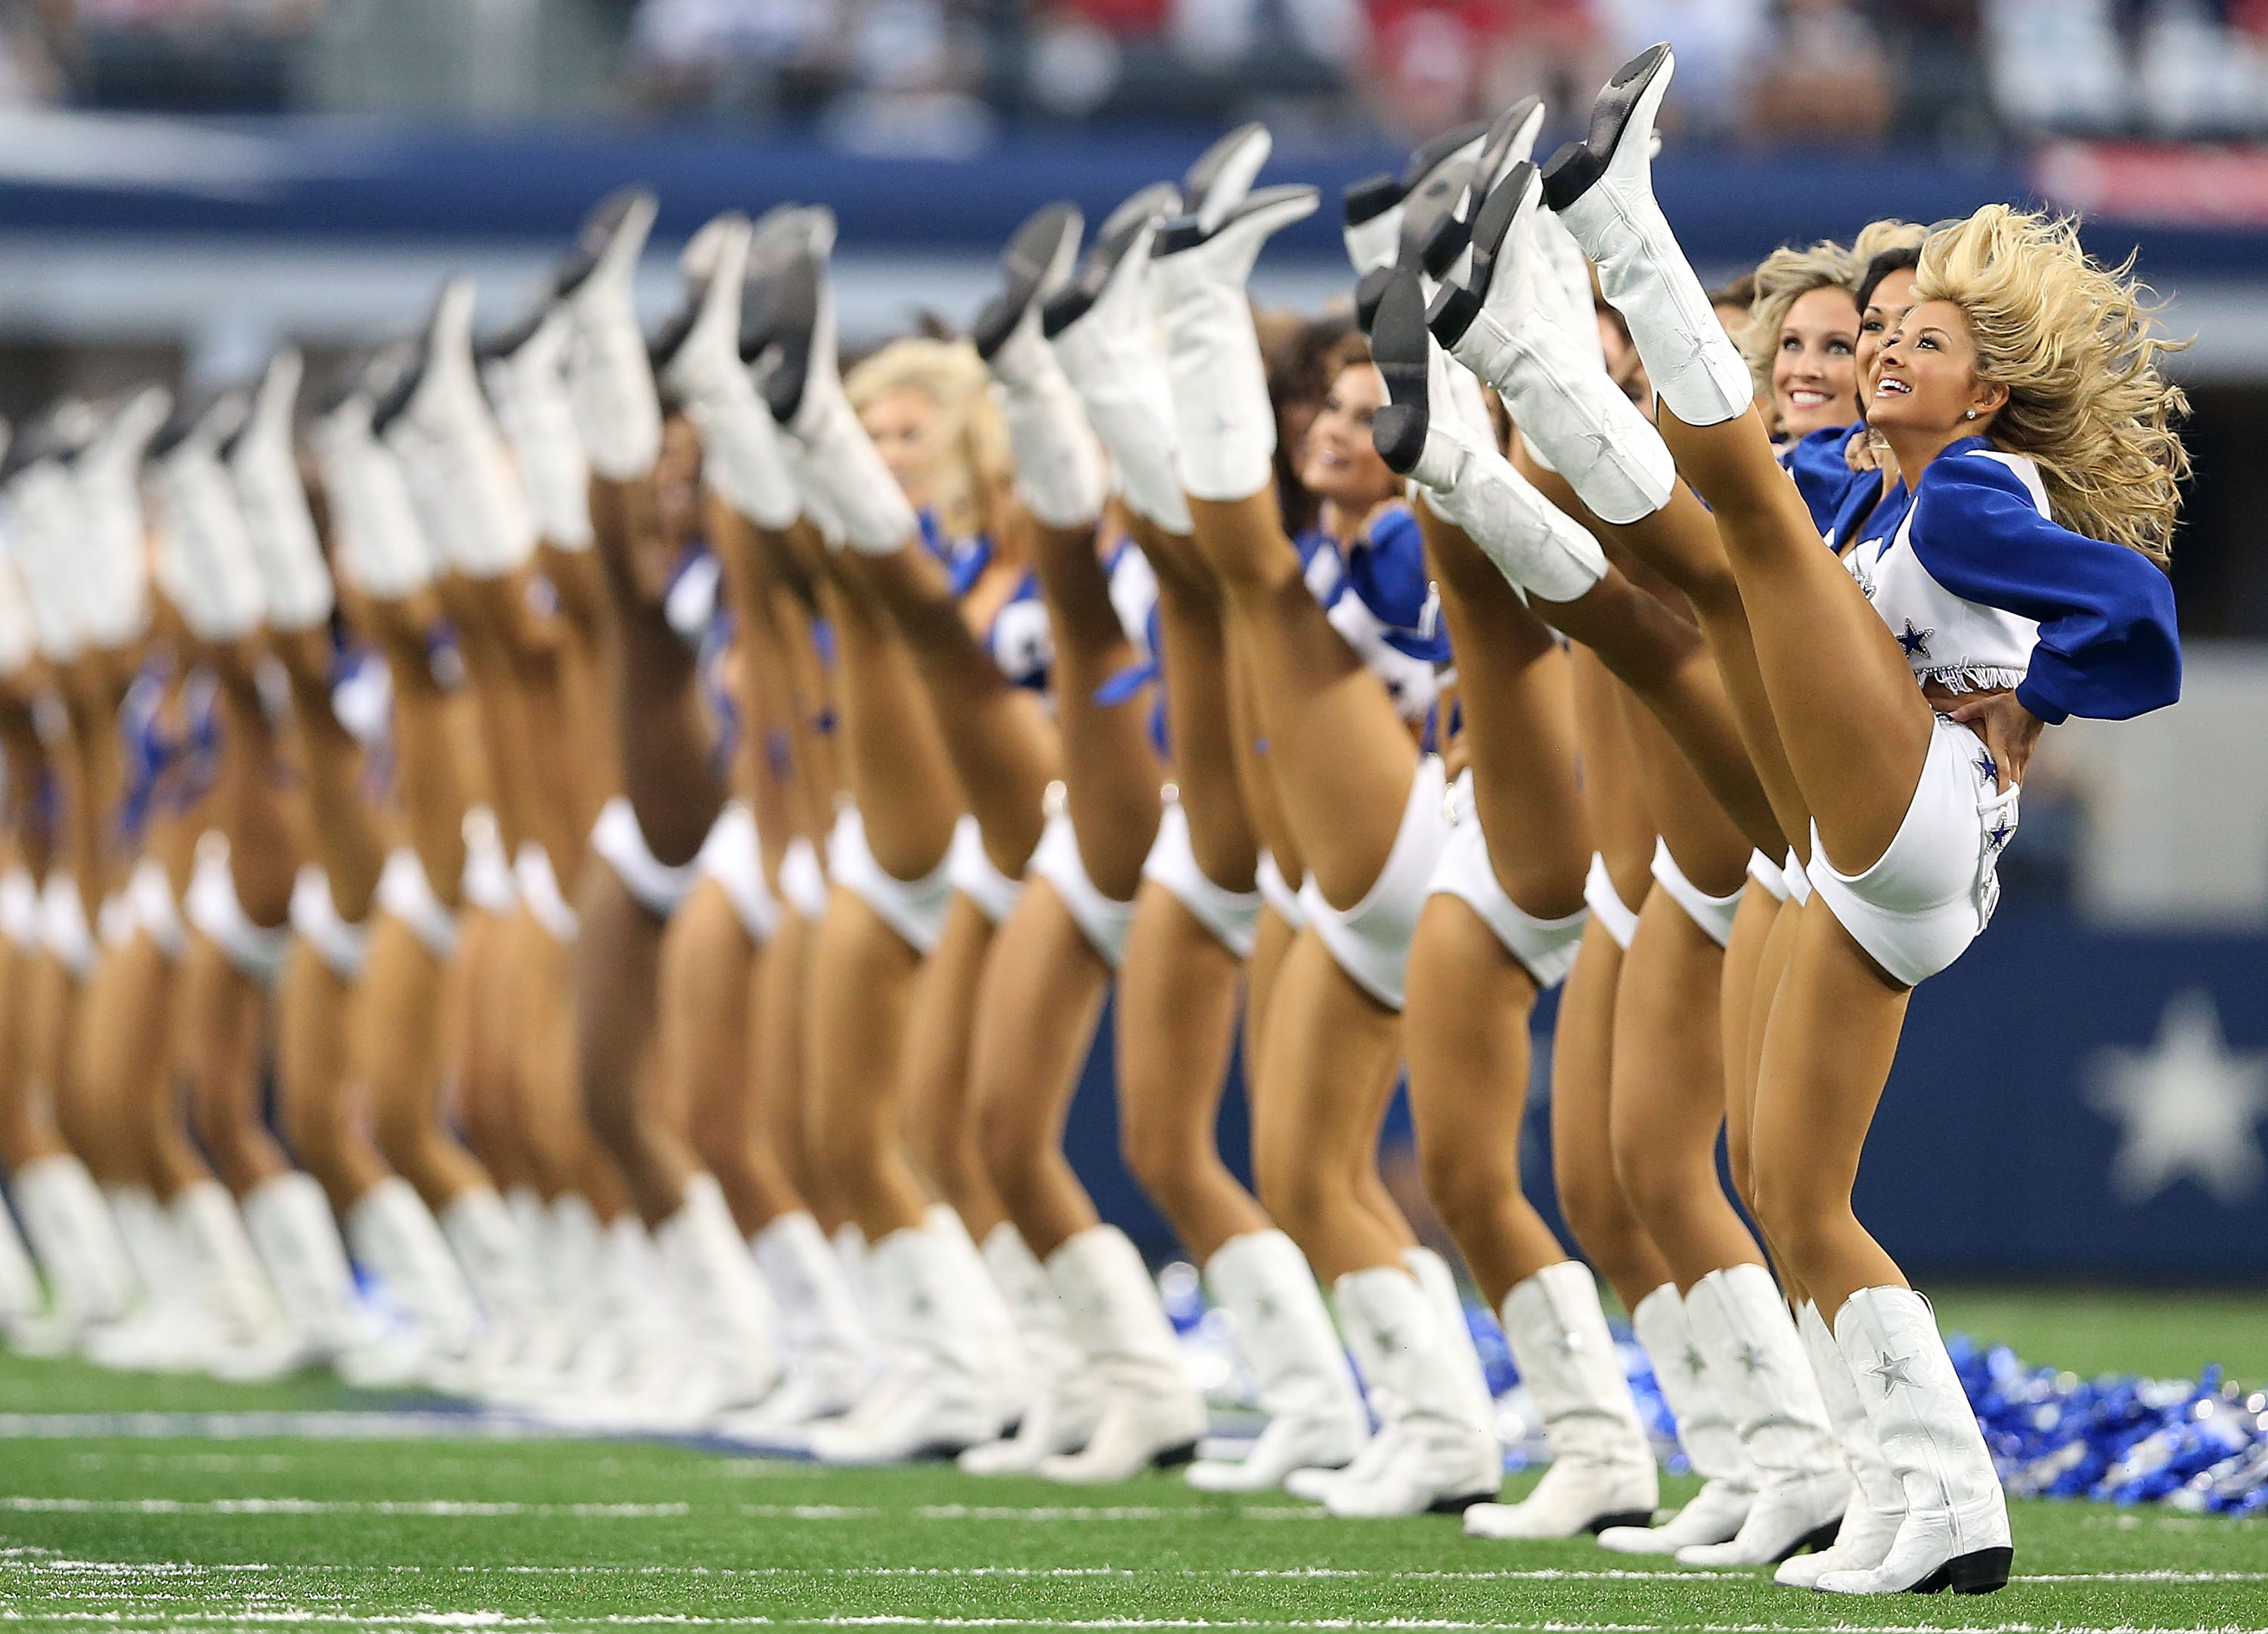 Remembering Suzanne Mitchell, the Longtime Director of the Dallas Cowboys Cheerleaders pic